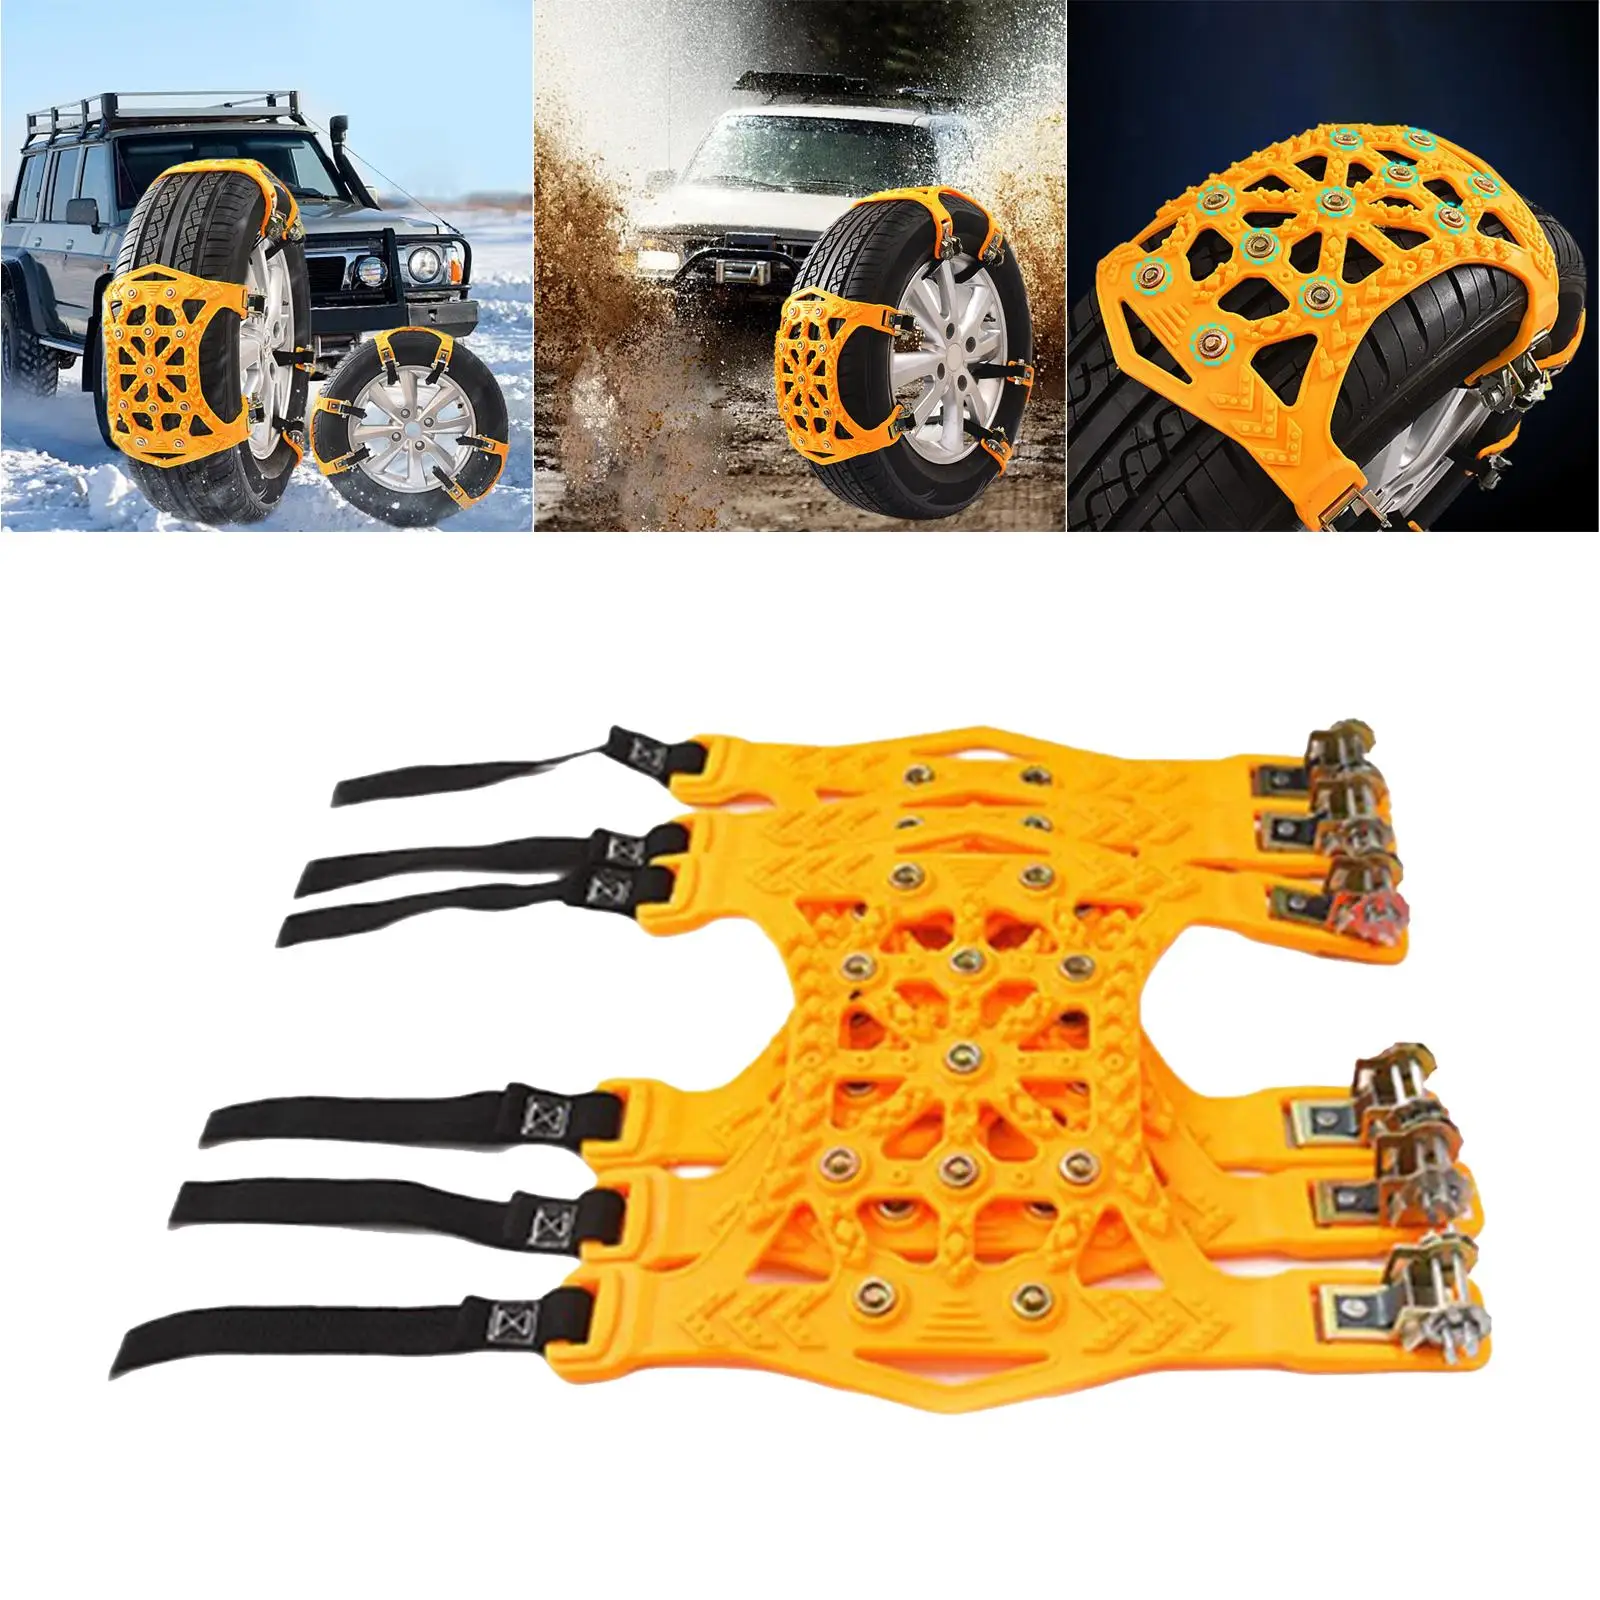 Set of 3Pcs Anti-Slip Tire Chains, Thickened for Tire Width 165-265mm Tire Chain Belt for Automotive Snowy Roads Muddy Safety